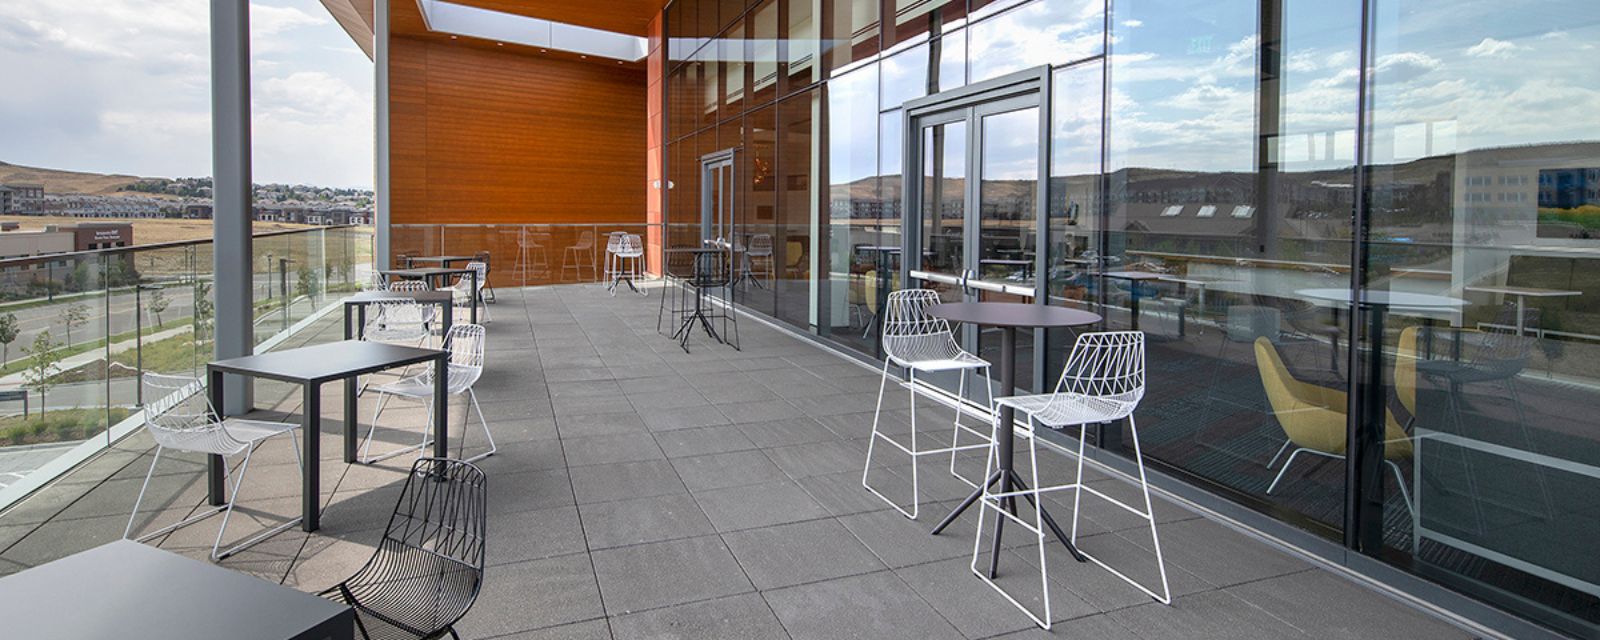 Outdoor seating at Charles Schwab Conference Center